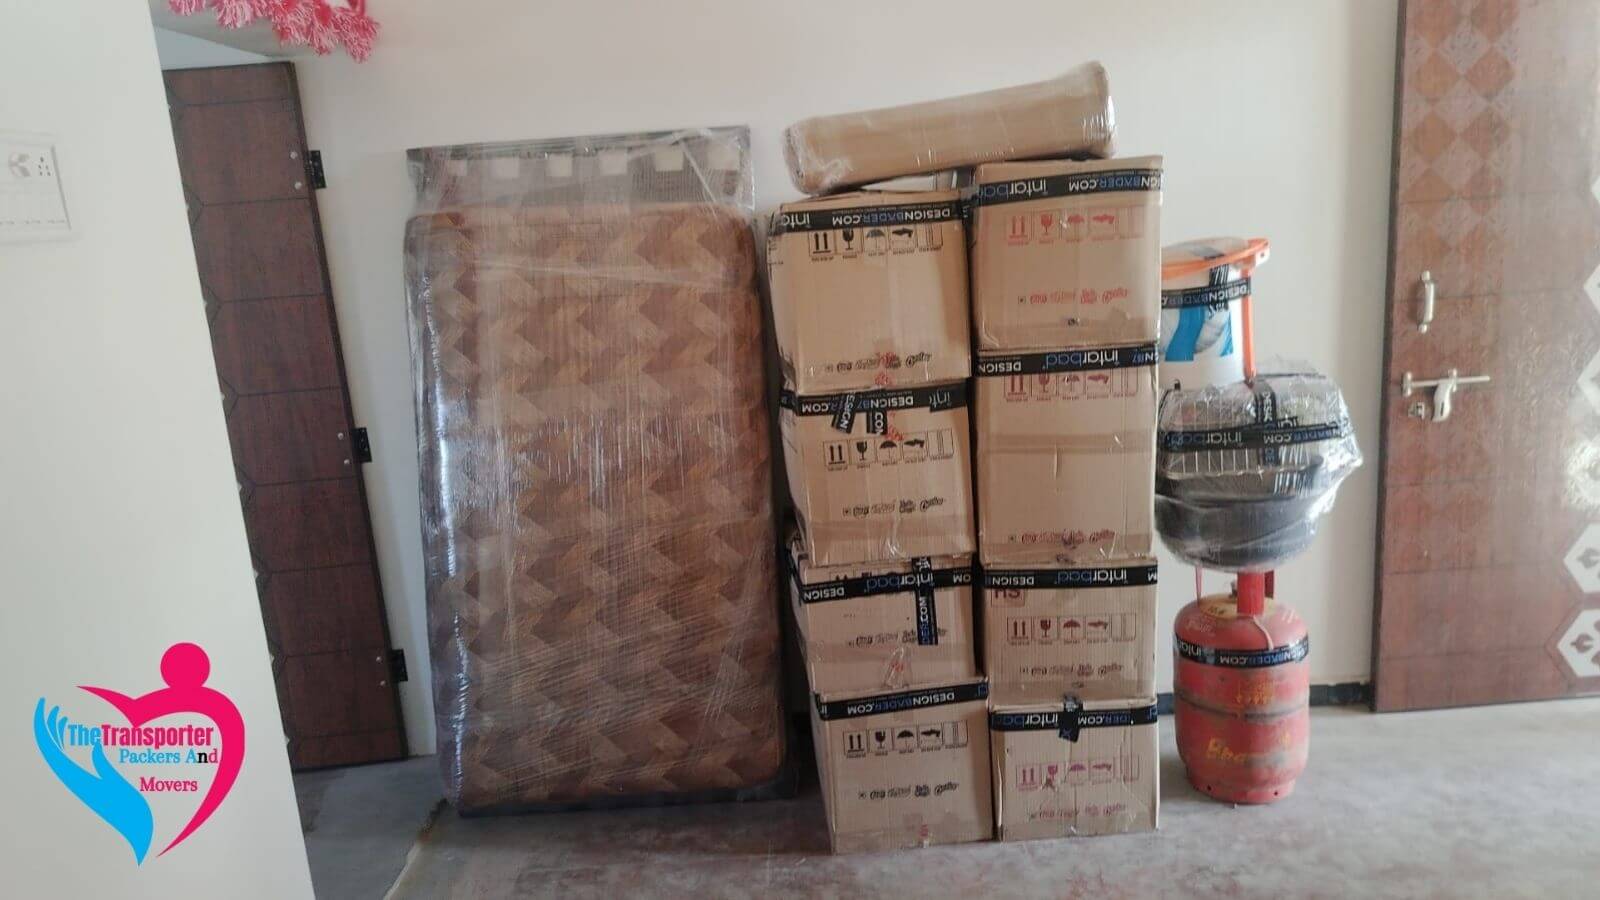 TheTransporter Packers and Movers in Ghaziabad - Our Commitment to You